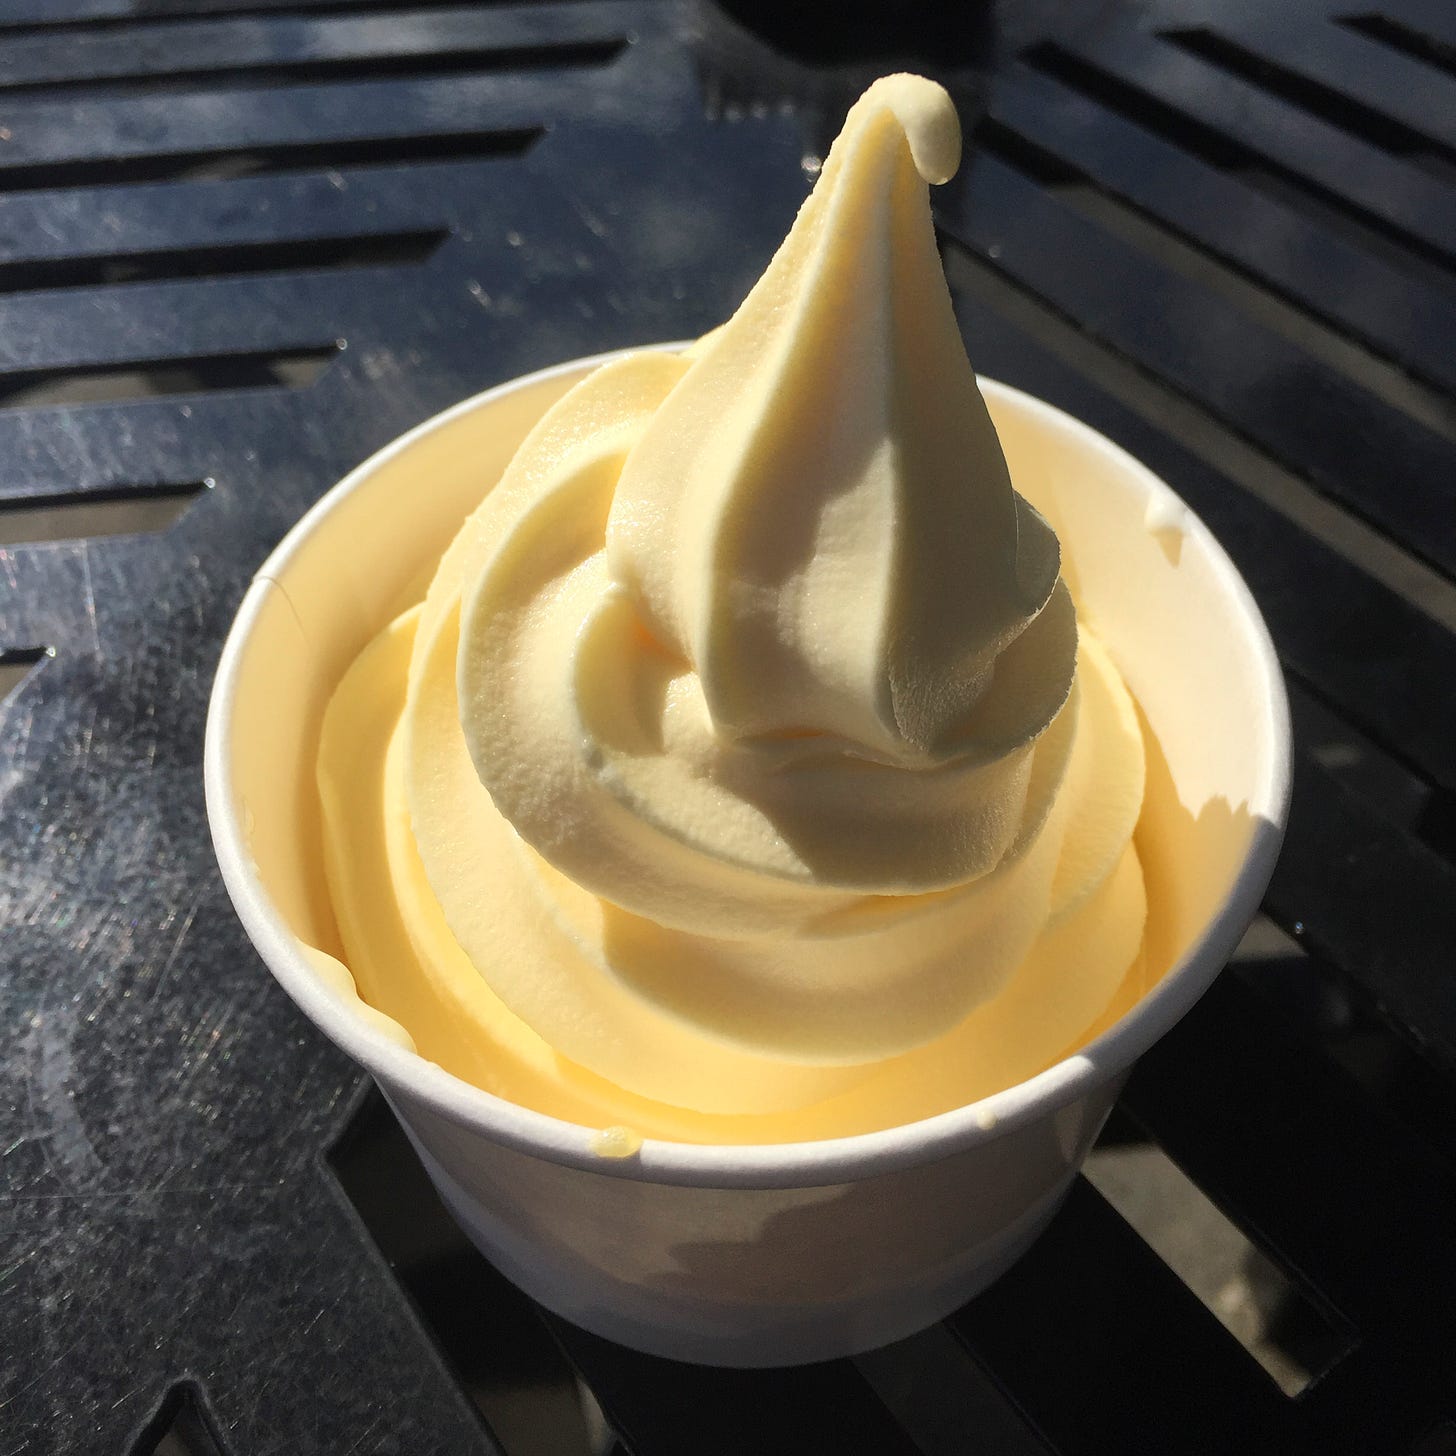 On a black outdoor table in a paper cup, a light yellow swirl of Dole whip.